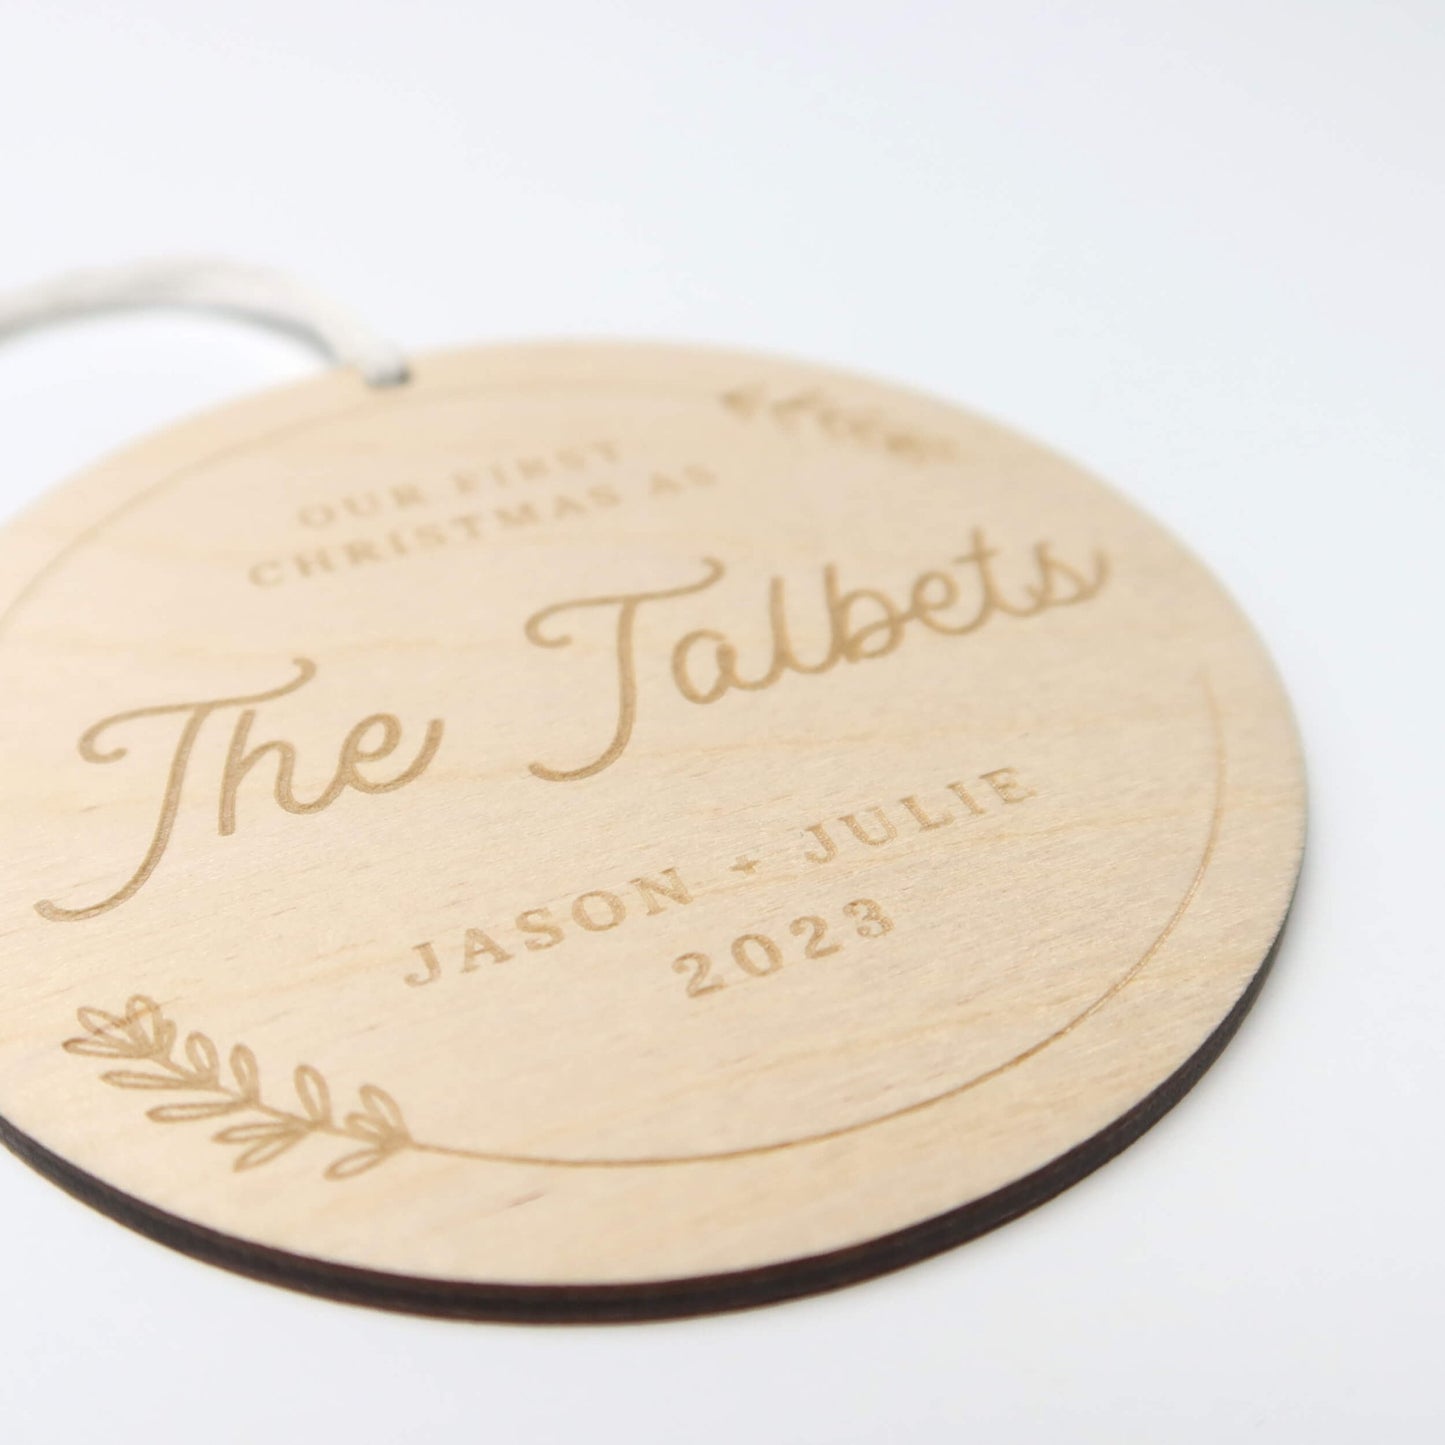 Personalized First Married Christmas Ornament - Holiday Ornaments - Moon Rock Prints